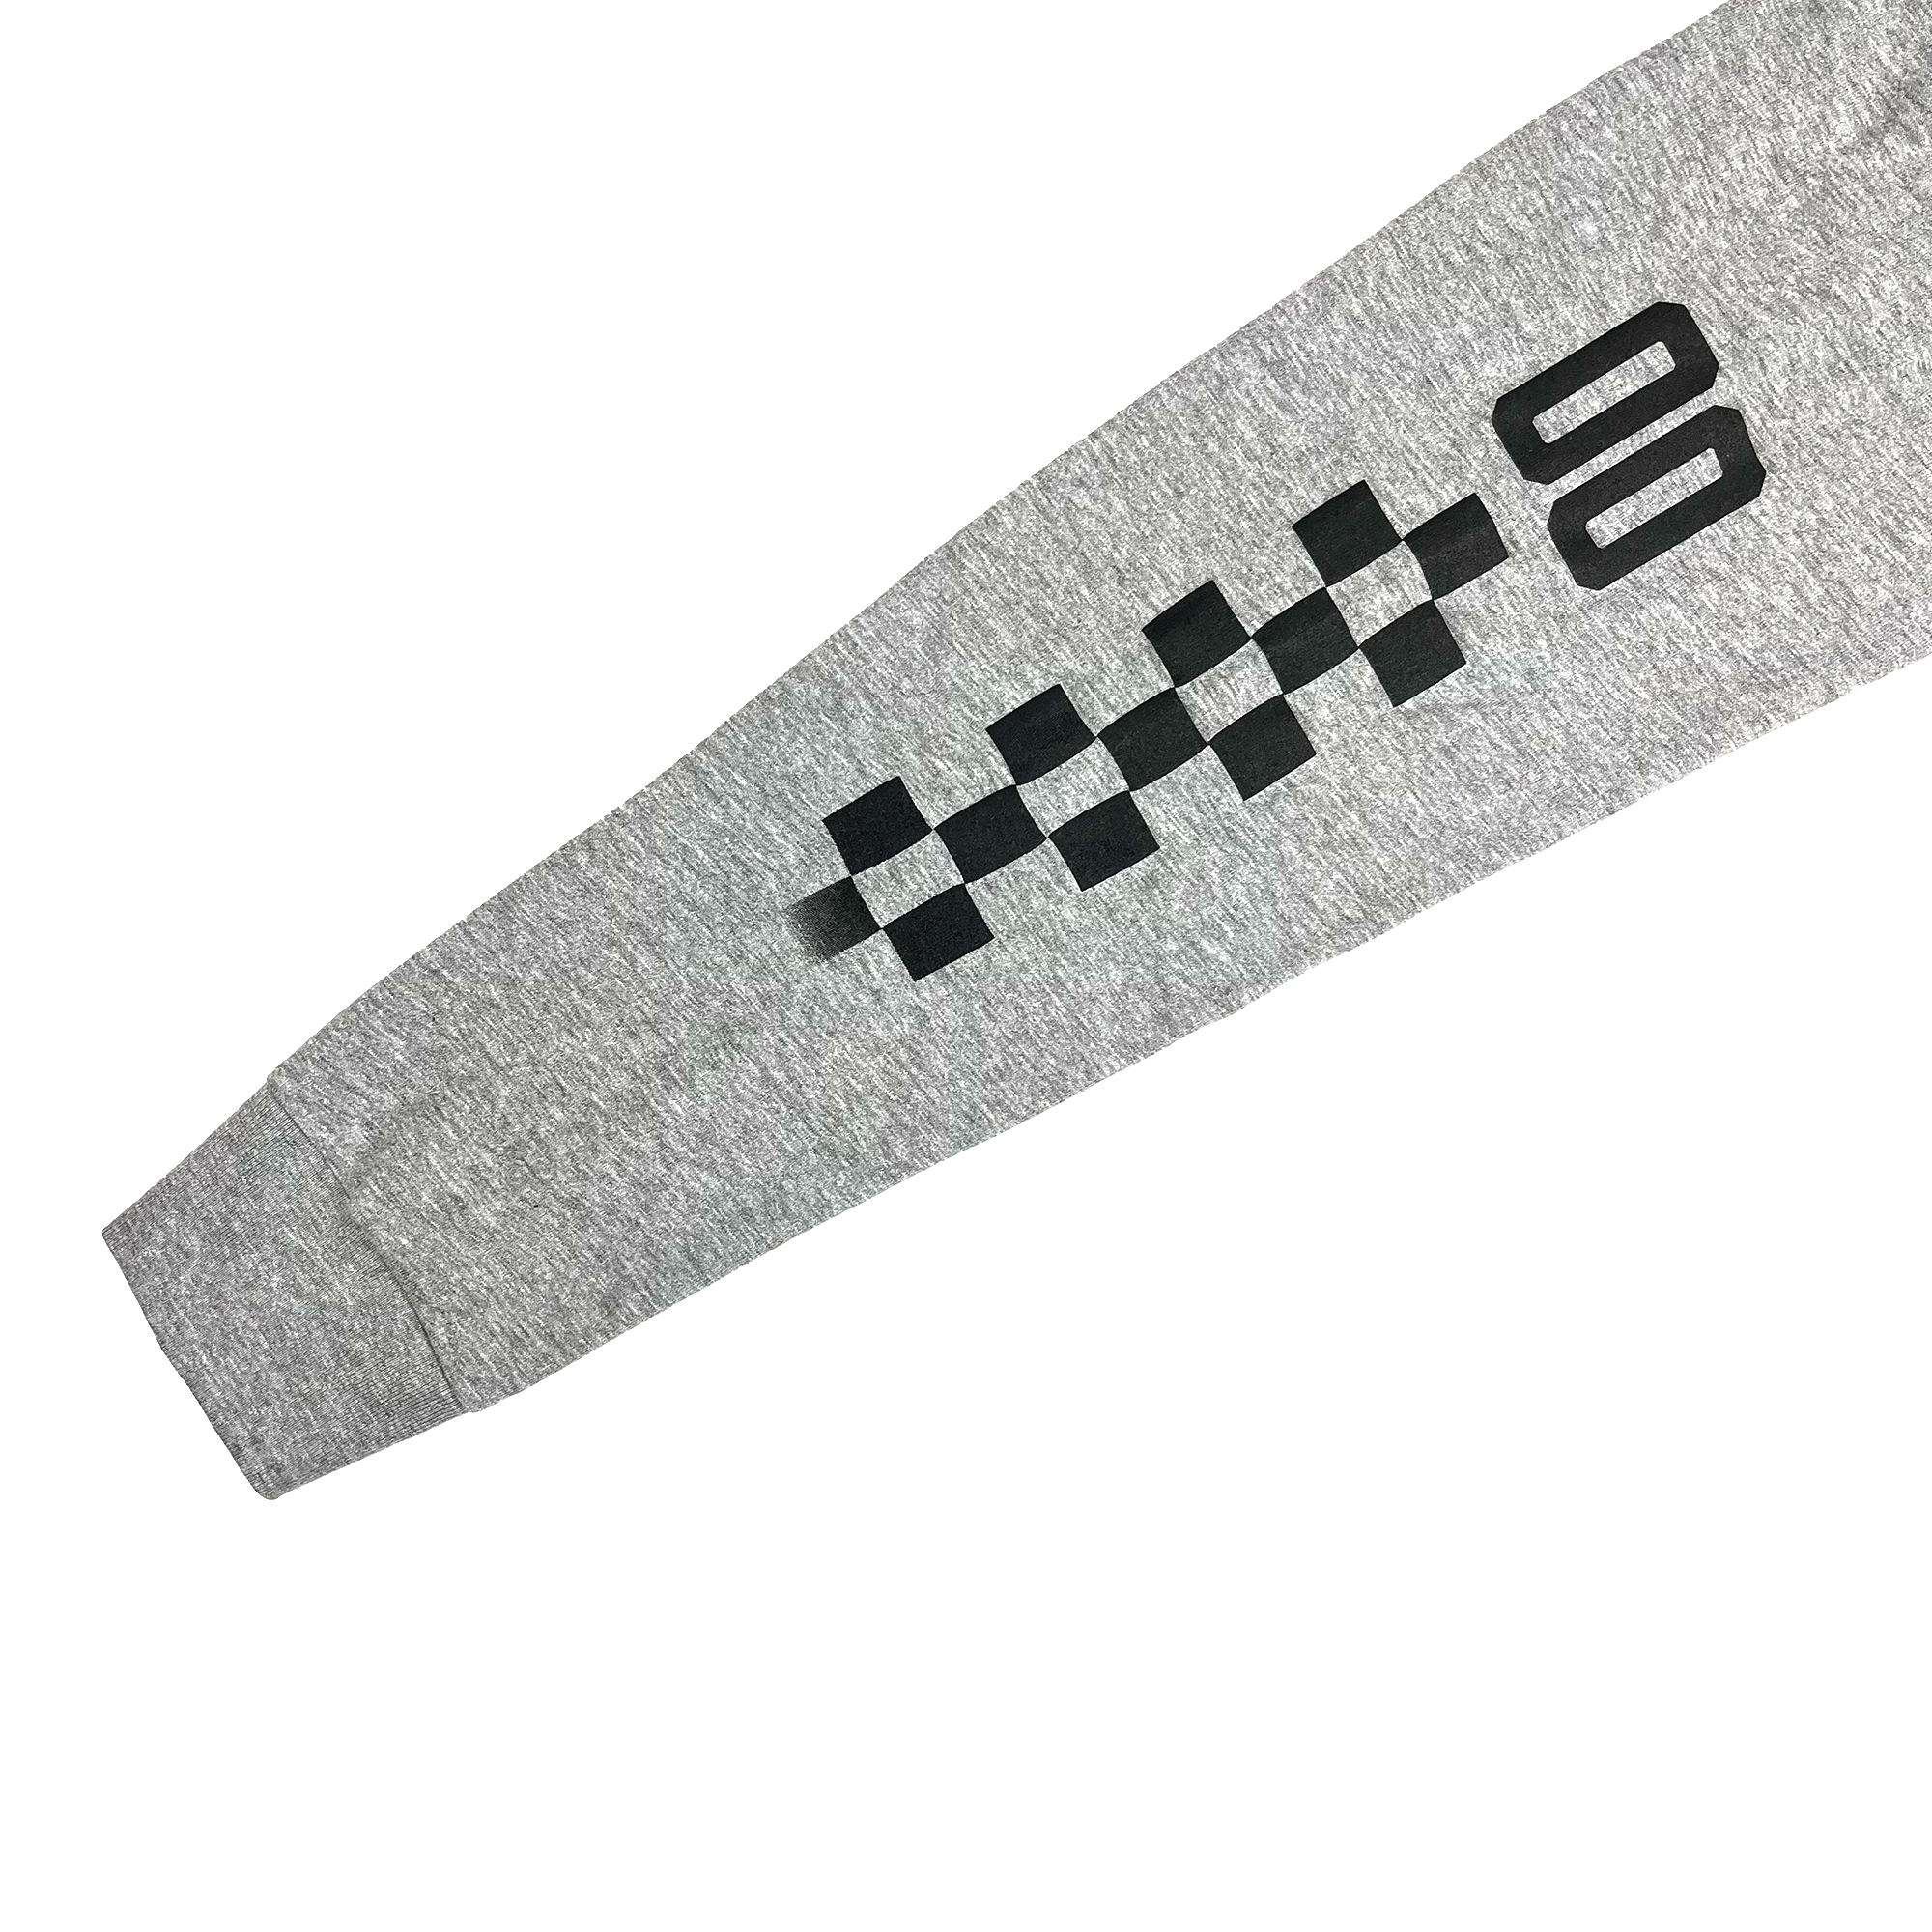 Close-up image of right sleeve of grey long-sleeve t-shirt with printed black checkered race car-inspired artwork and '00'.